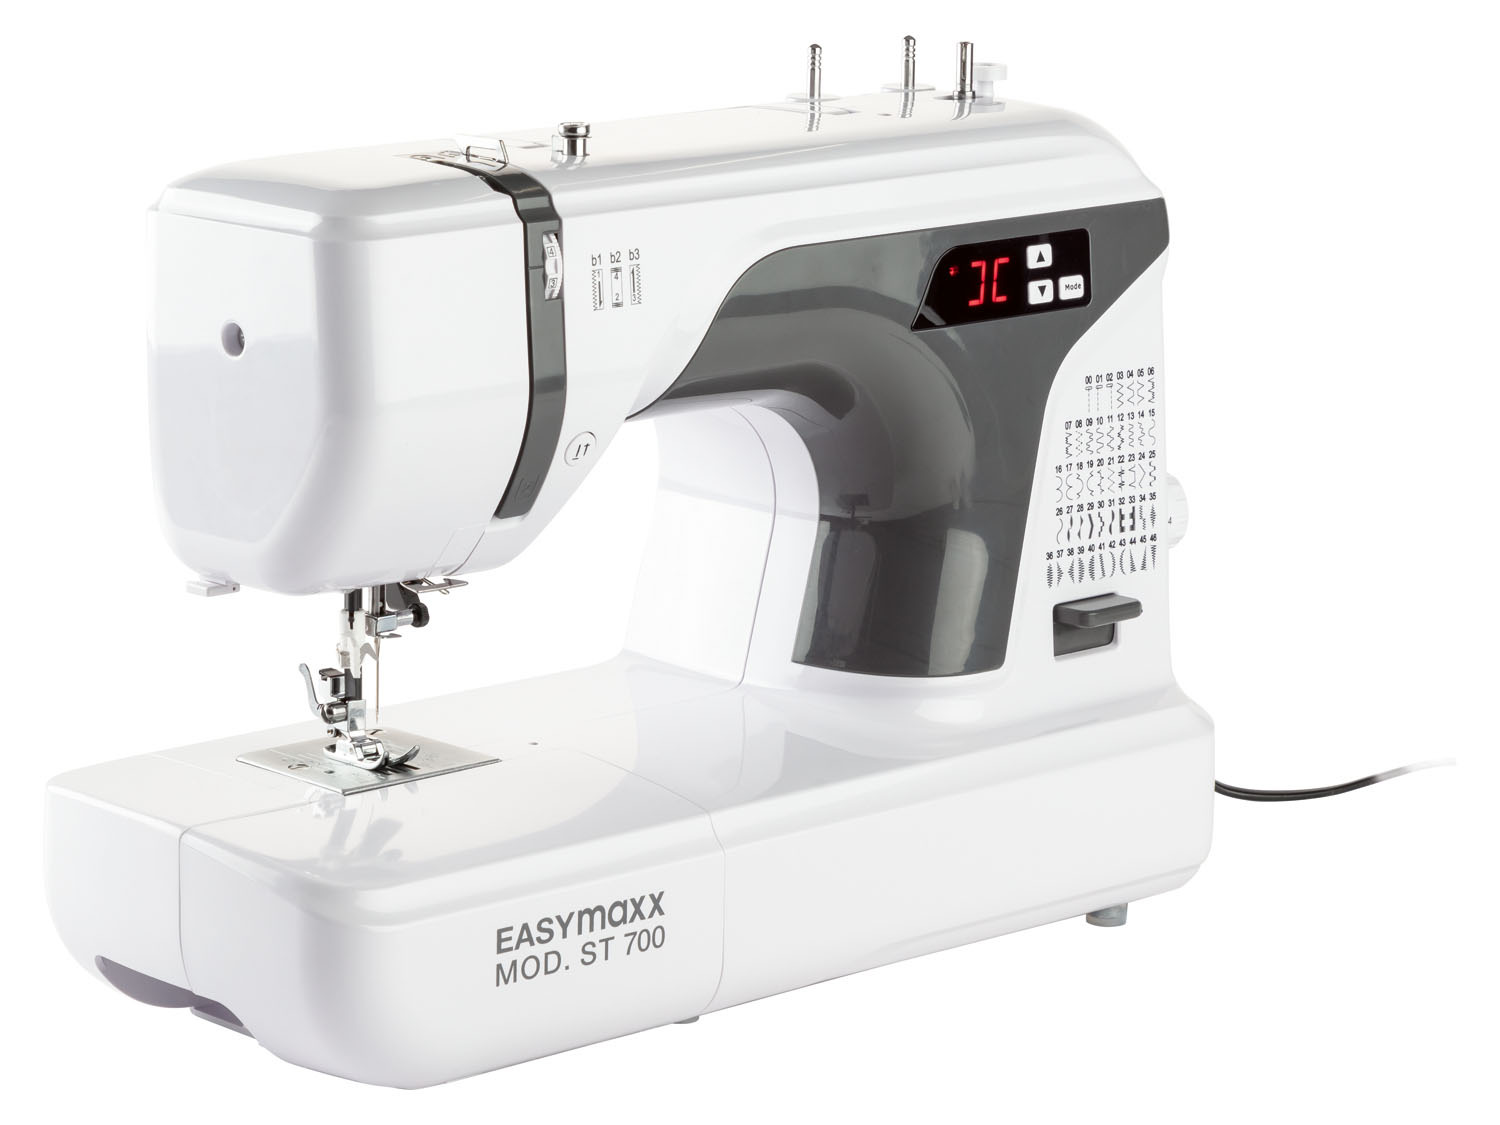 Easymaxx Compact Sewing Machine REVIEW 